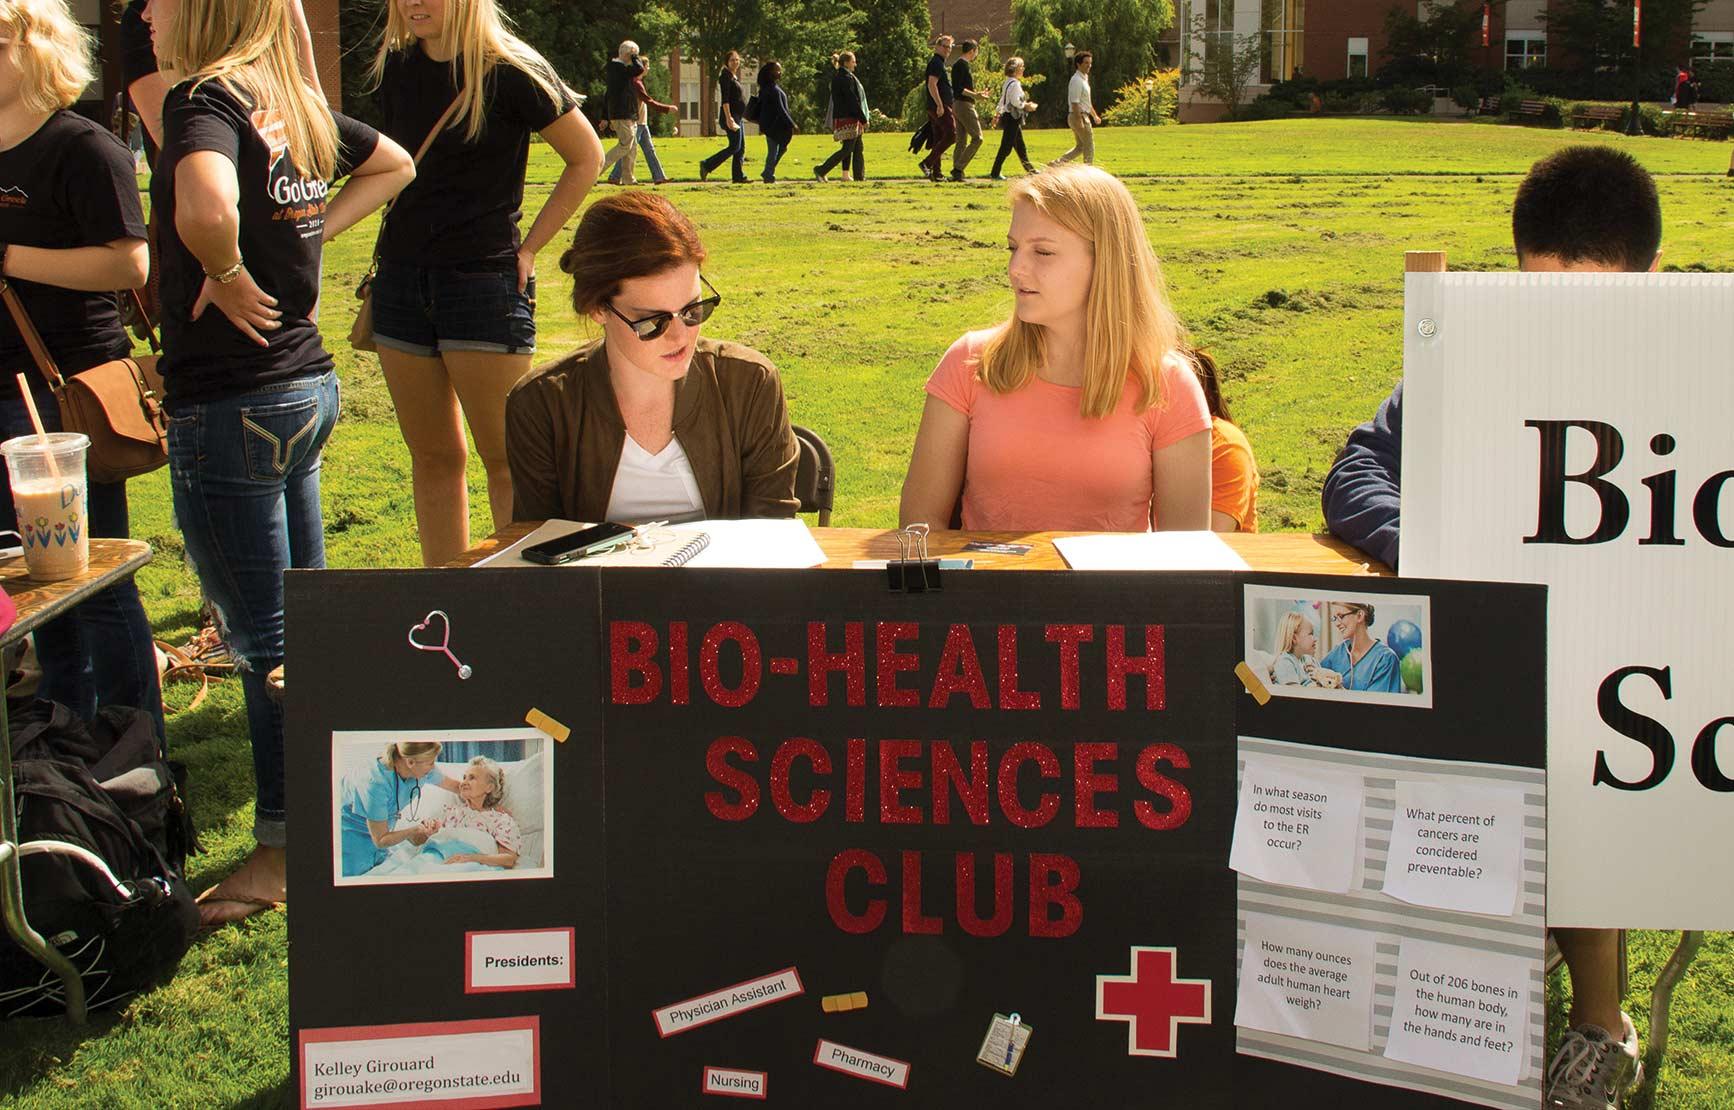 BioHealth Sciences Club booth at the College of Science Fall Welcome Social outside of Kidder Hall.